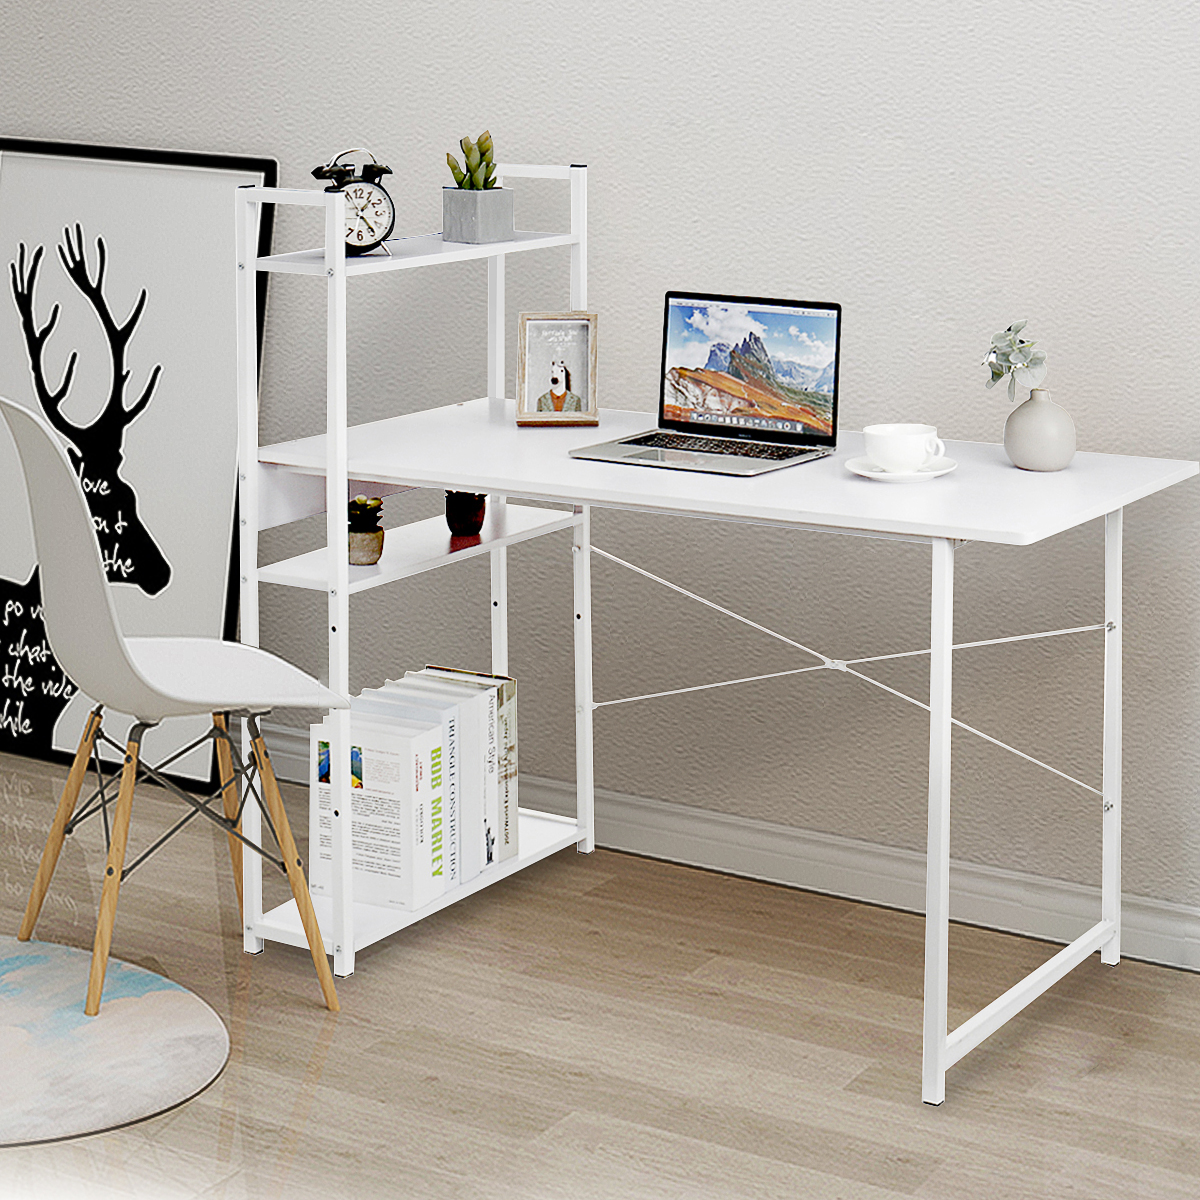 Steel-Wood-Computer-Desk-home-Simple-Modern-Style-for-Home-Office-1795715-5